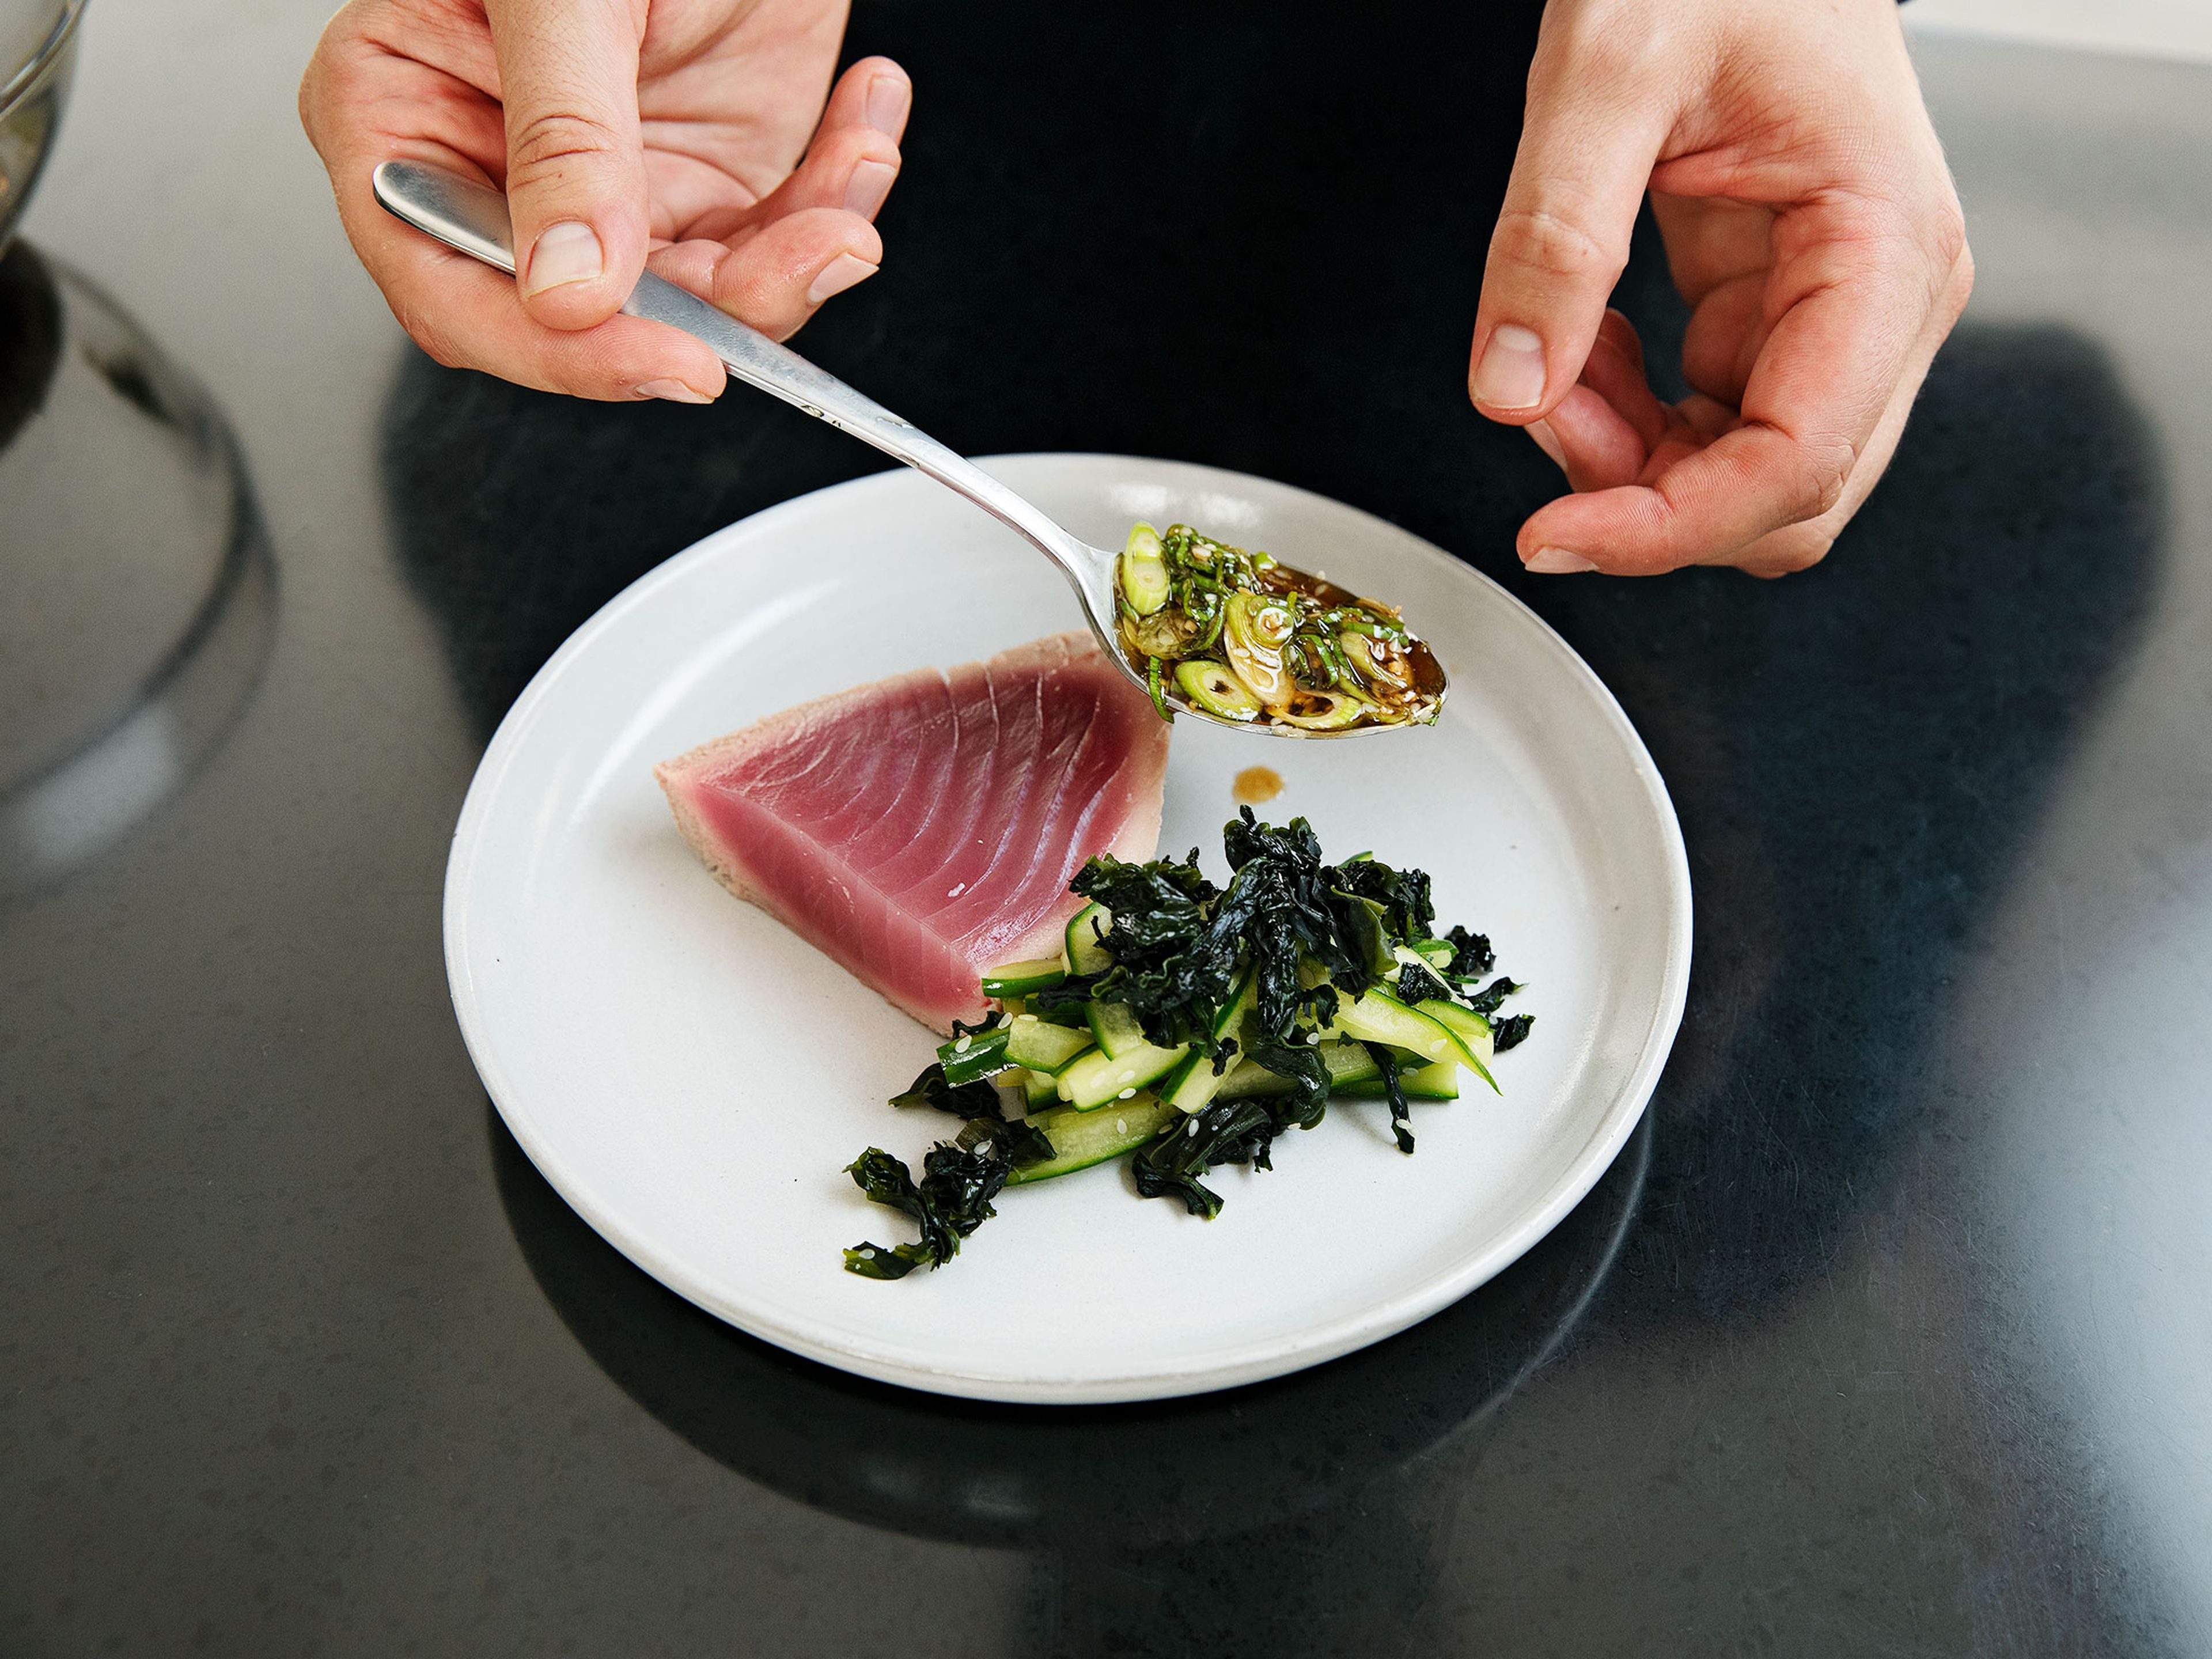 Cut tuna in slices of about 0.5-cm/0.20-in. thick. Serve with the tataki sauce and cucumber-seaweed salad on the side. Enjoy!